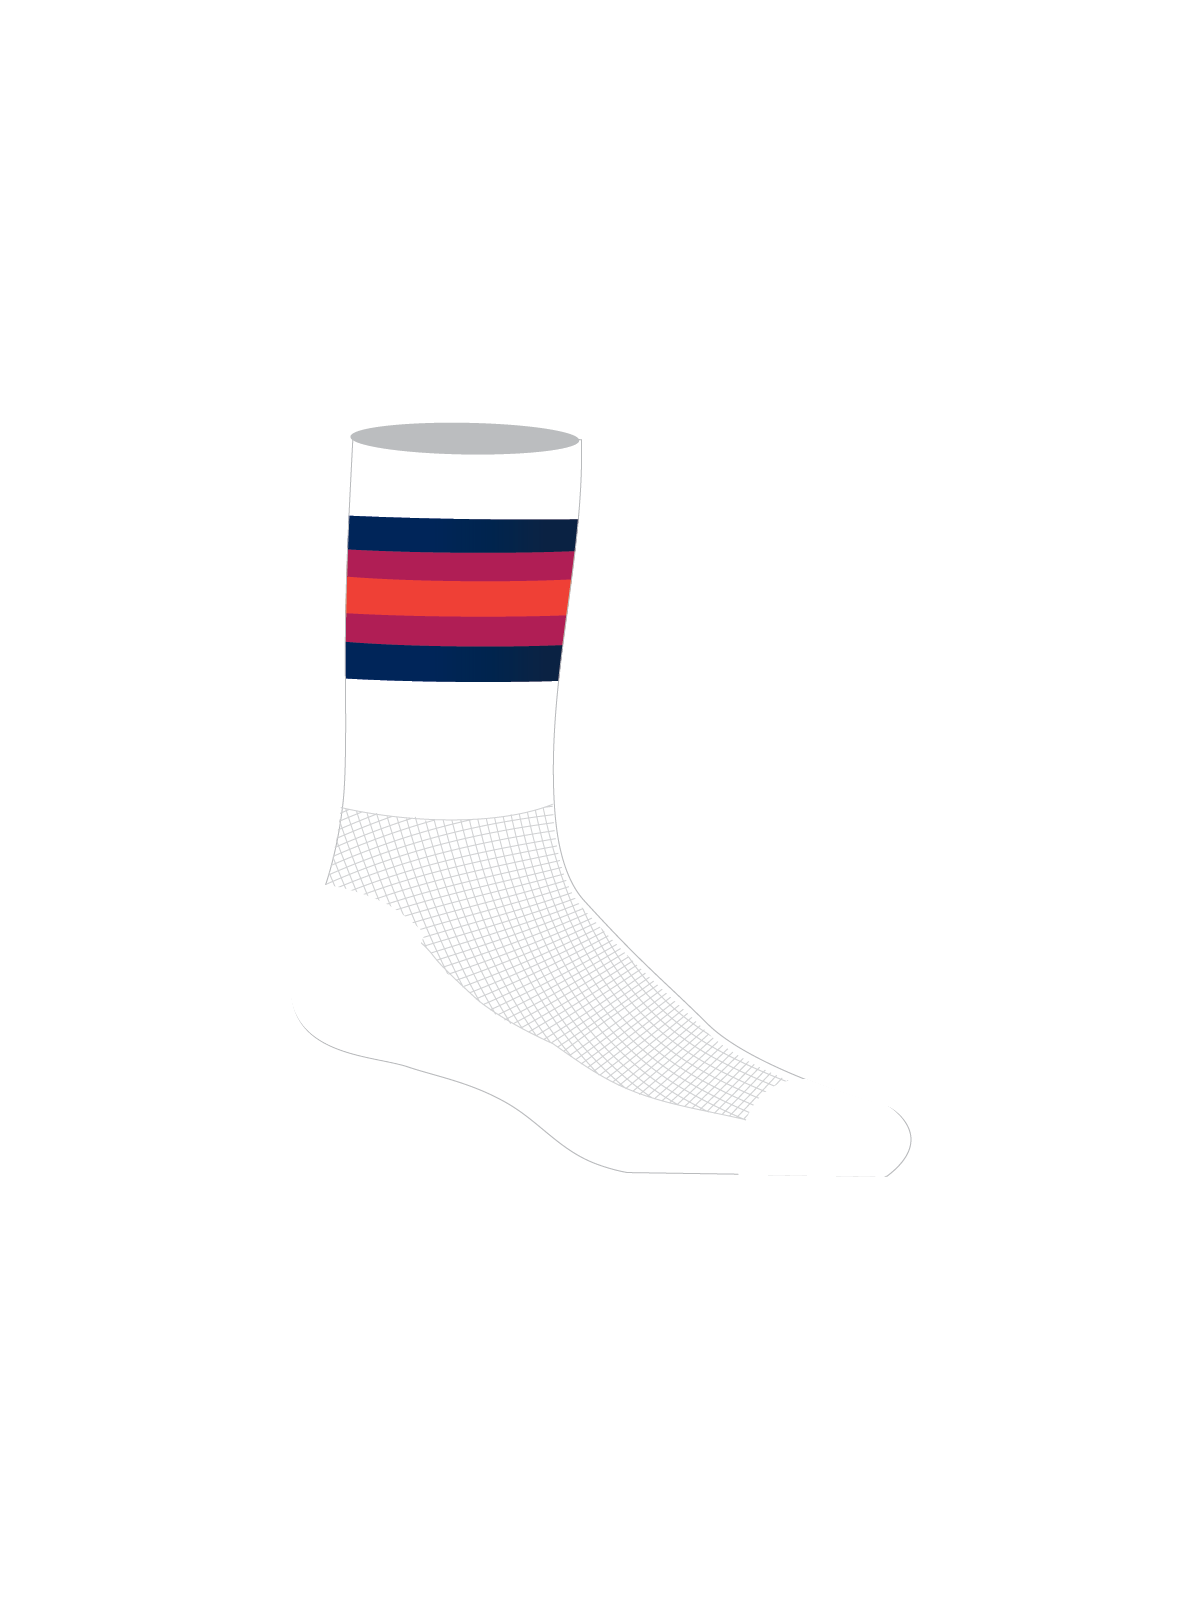 CRC 7" Cycling Sock - Limited Quantities Available